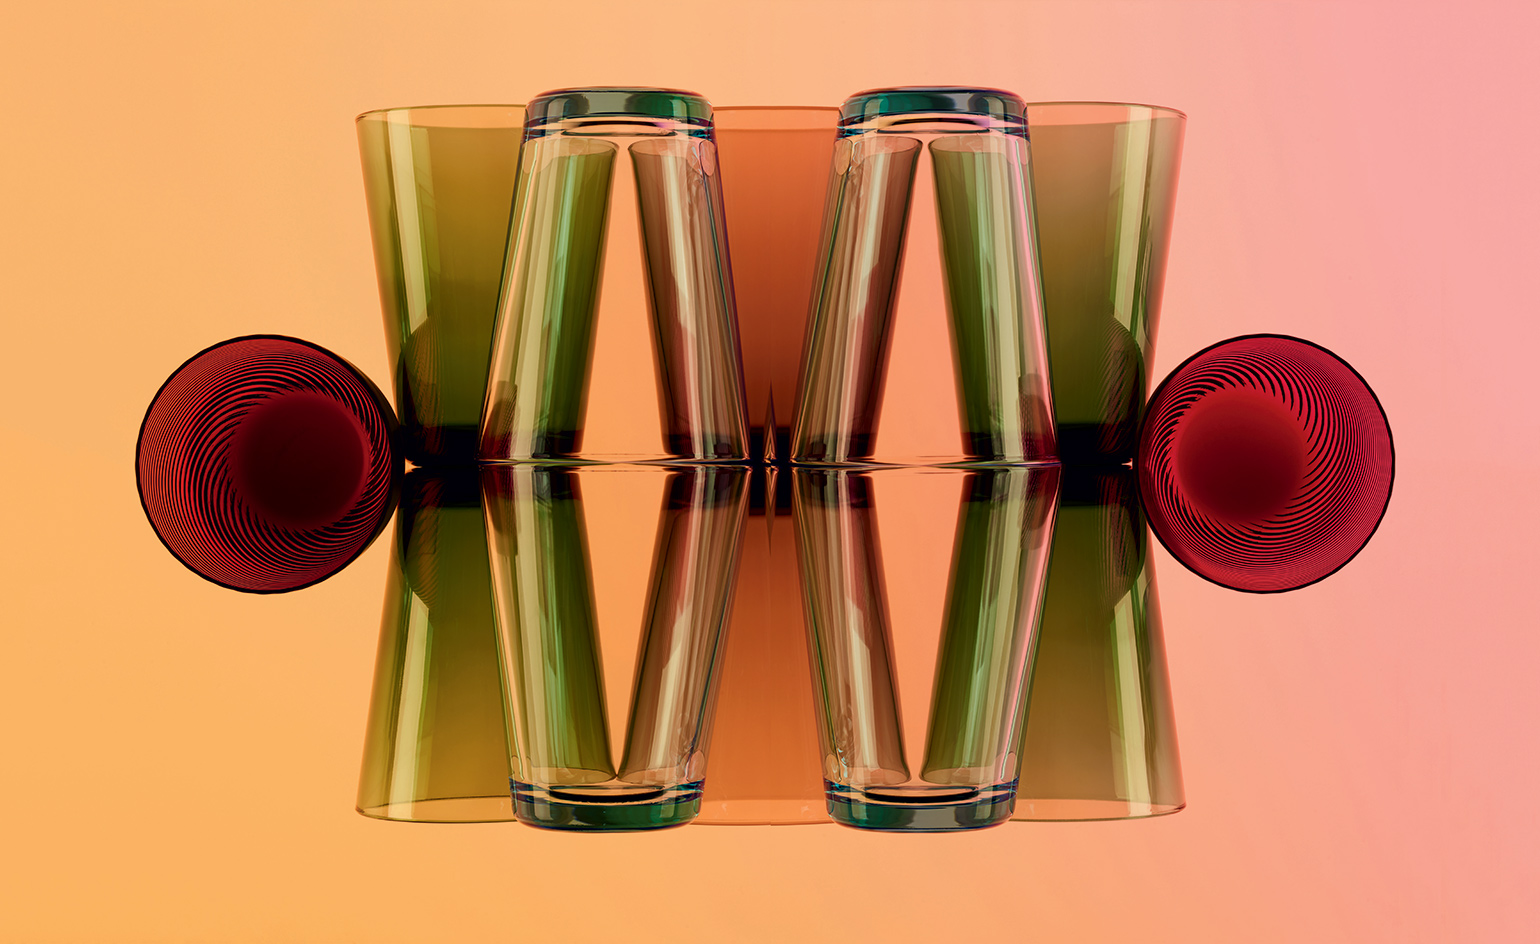 Tumblers in deep red, and various shades of green on a gradient orange-pink background.